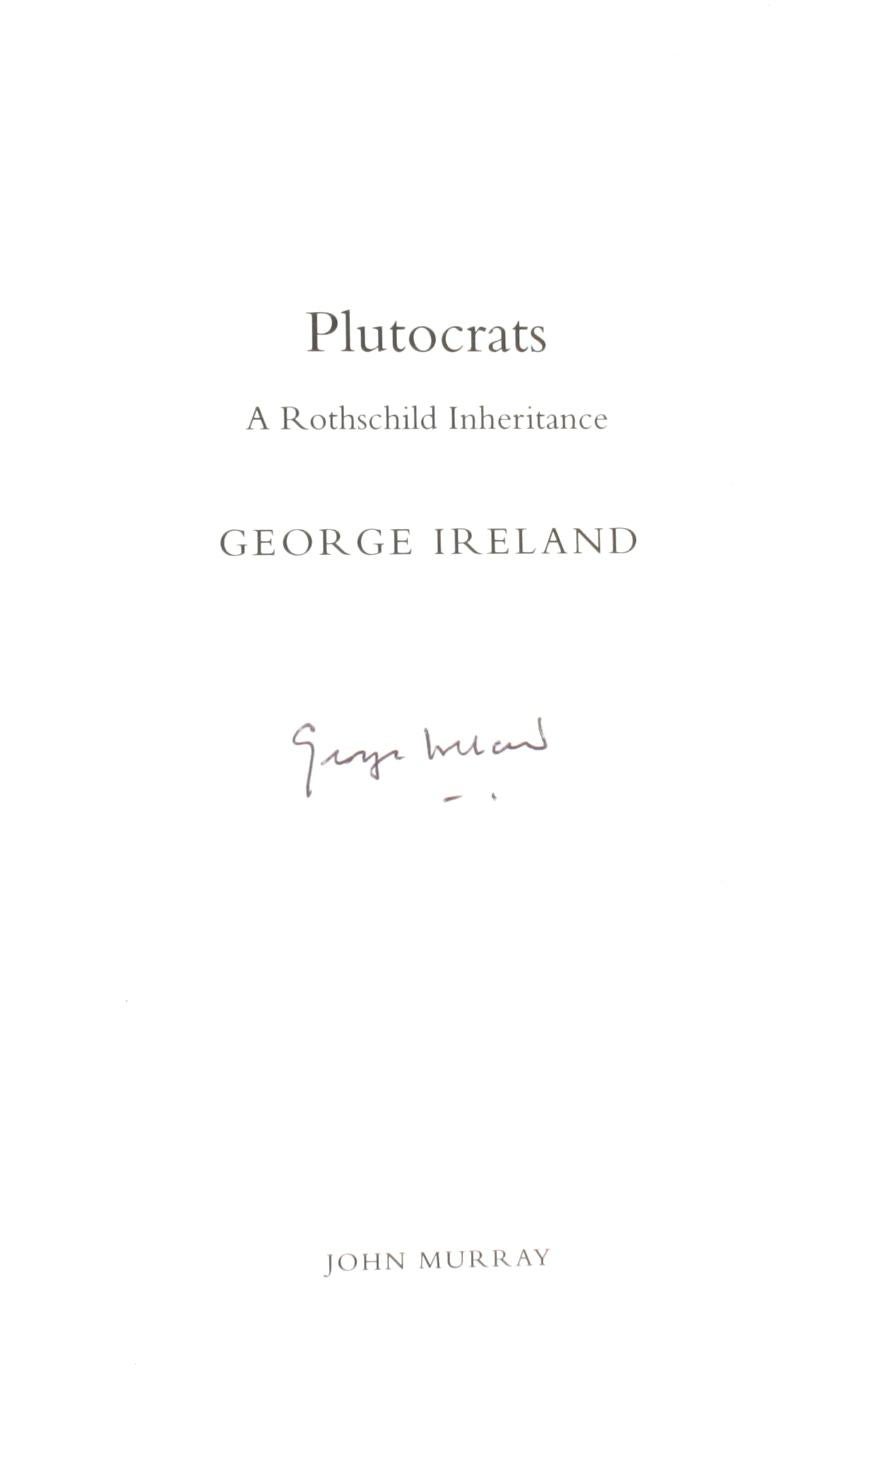 Plutocrats: A Rothschild Inheritance by George Ireland. John Murray, London, U.K., 2007. A Signed 1st Ed hardcover with dust jacket. 432pp, illustrated. When the German Jewish Rothschild family founded a chain of banks in Frankfurt, London, Paris,